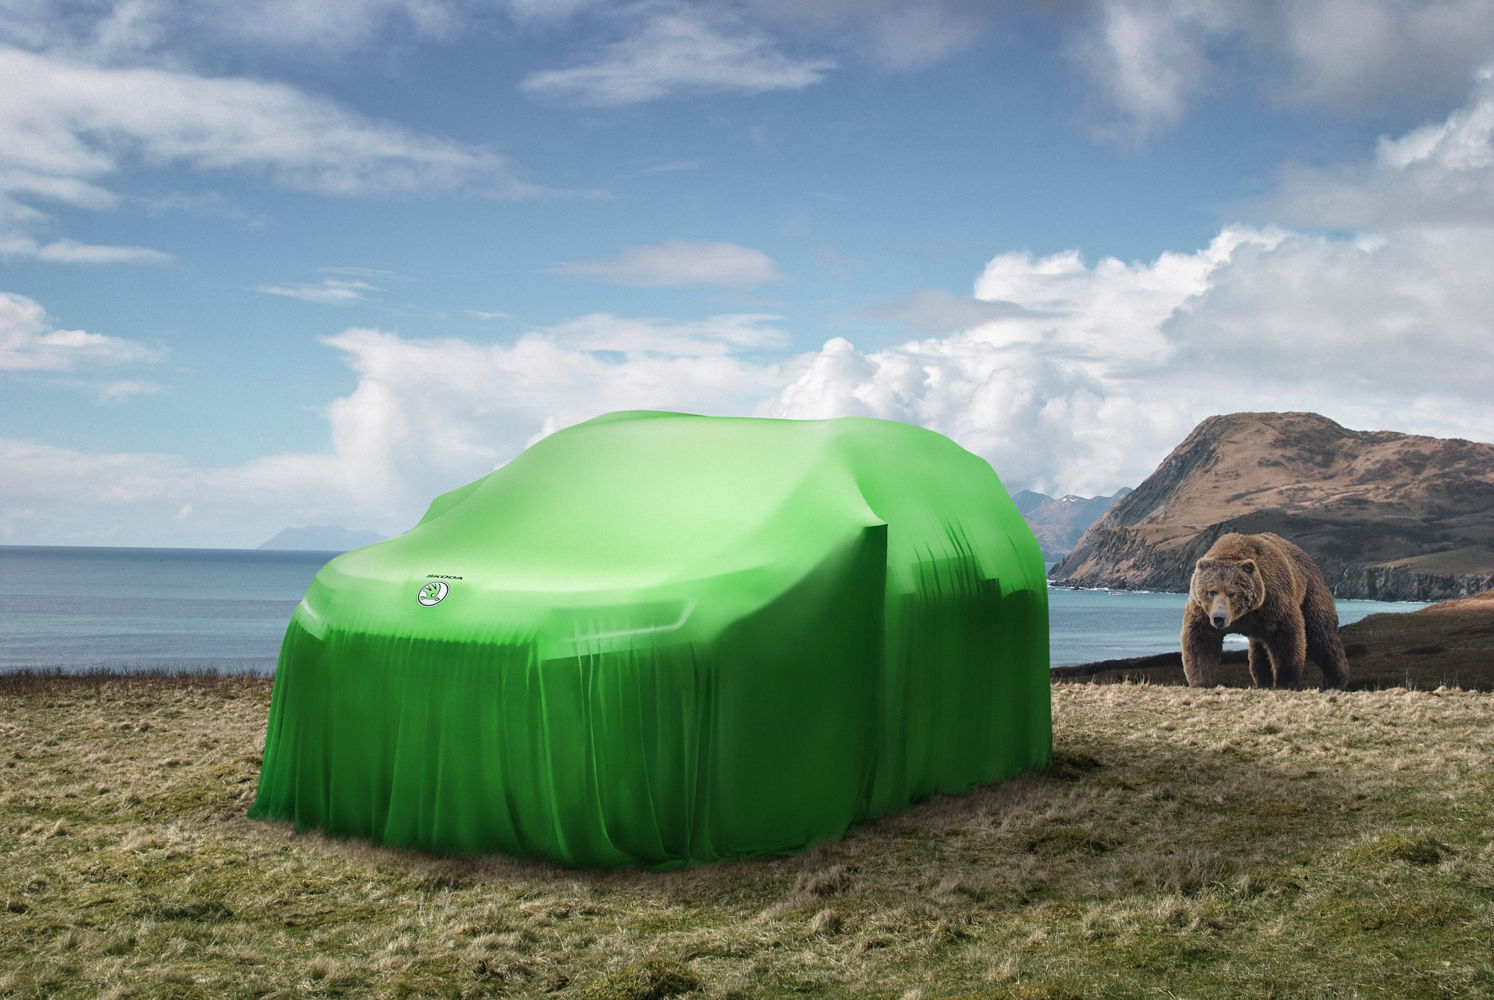 Size, strength and command of the great outdoors – the eponymous bear and the ŠKODA Kodiaq share common traits.